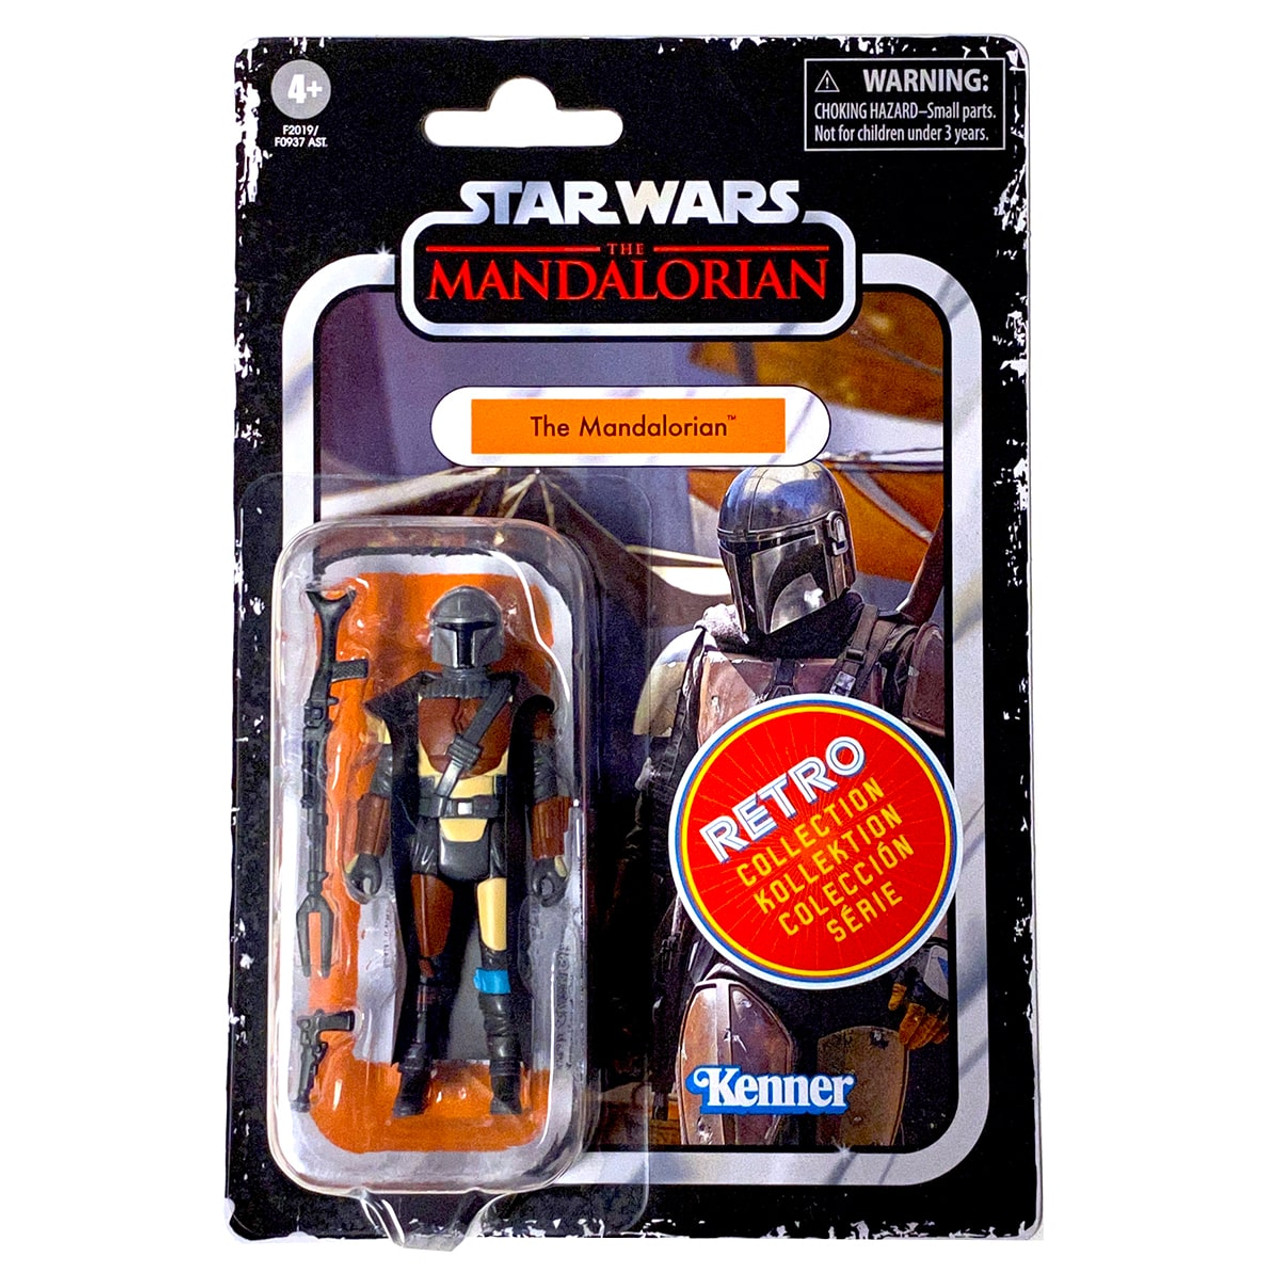 https://cdn11.bigcommerce.com/s-7zzpjxzgea/images/stencil/1280x1280/products/857/2995/Retro_Collection_Mandalorian_Carded_In-Stock-min__05205.1629817673.jpg?c=2